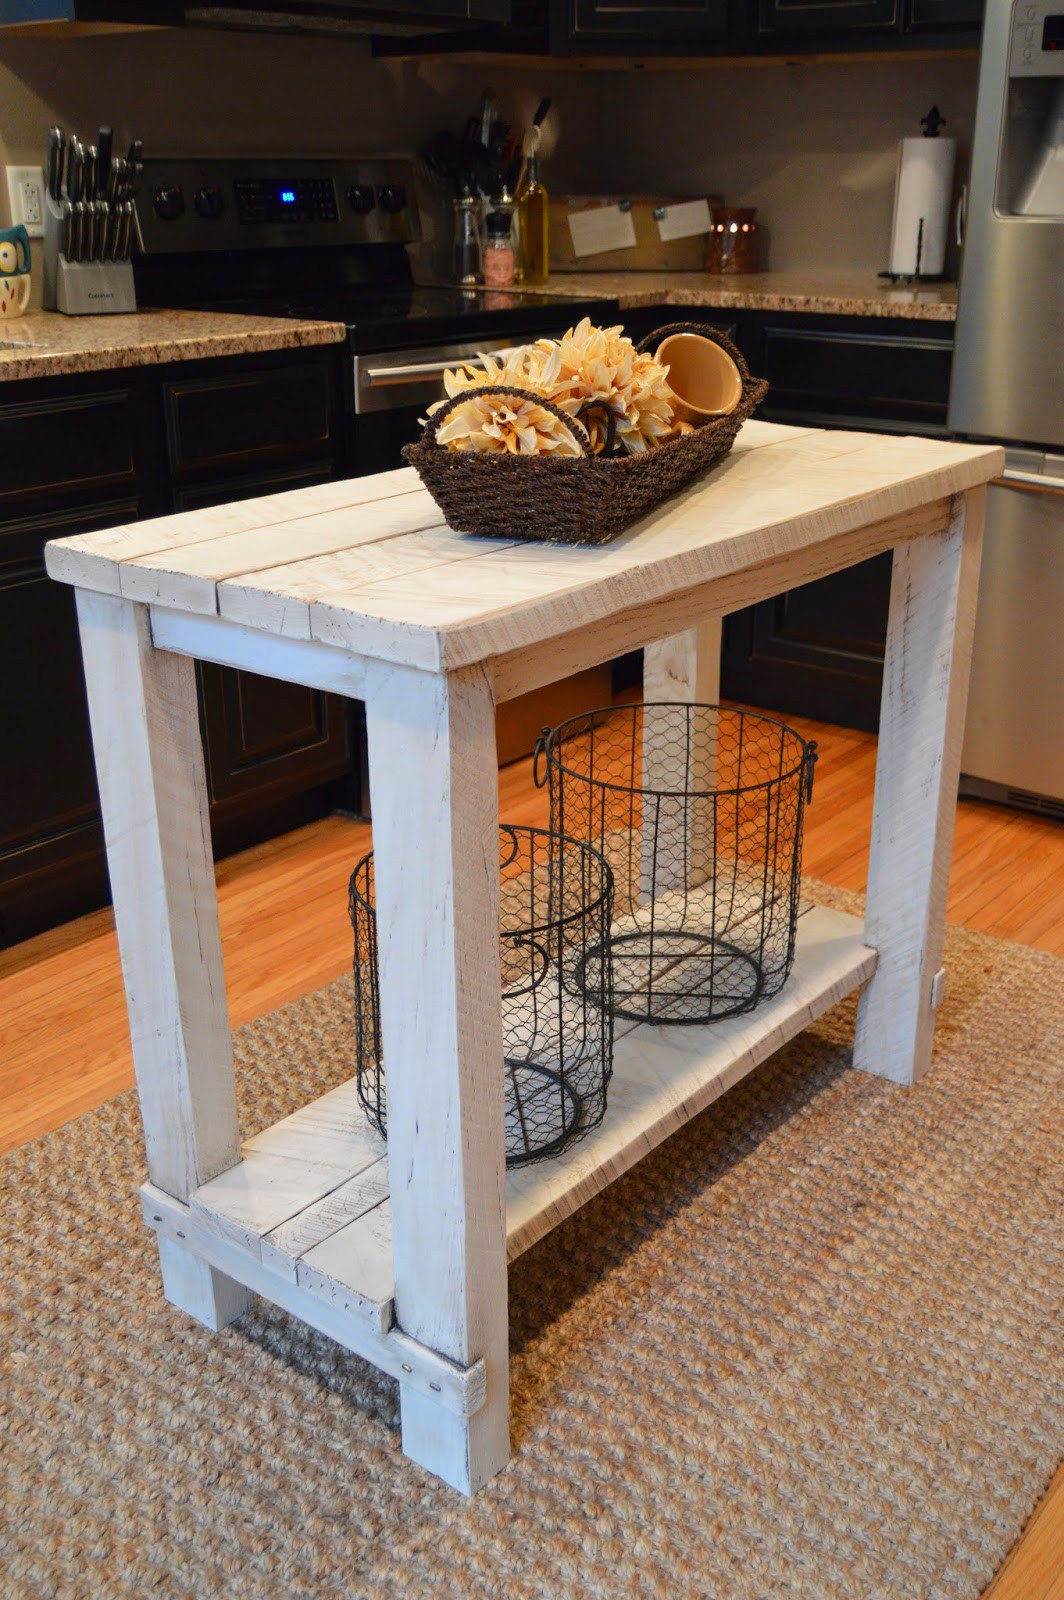 Reclaimed Wood Kitchen Island DIY
 15 Gorgeous DIY Kitchen Islands For Every Bud